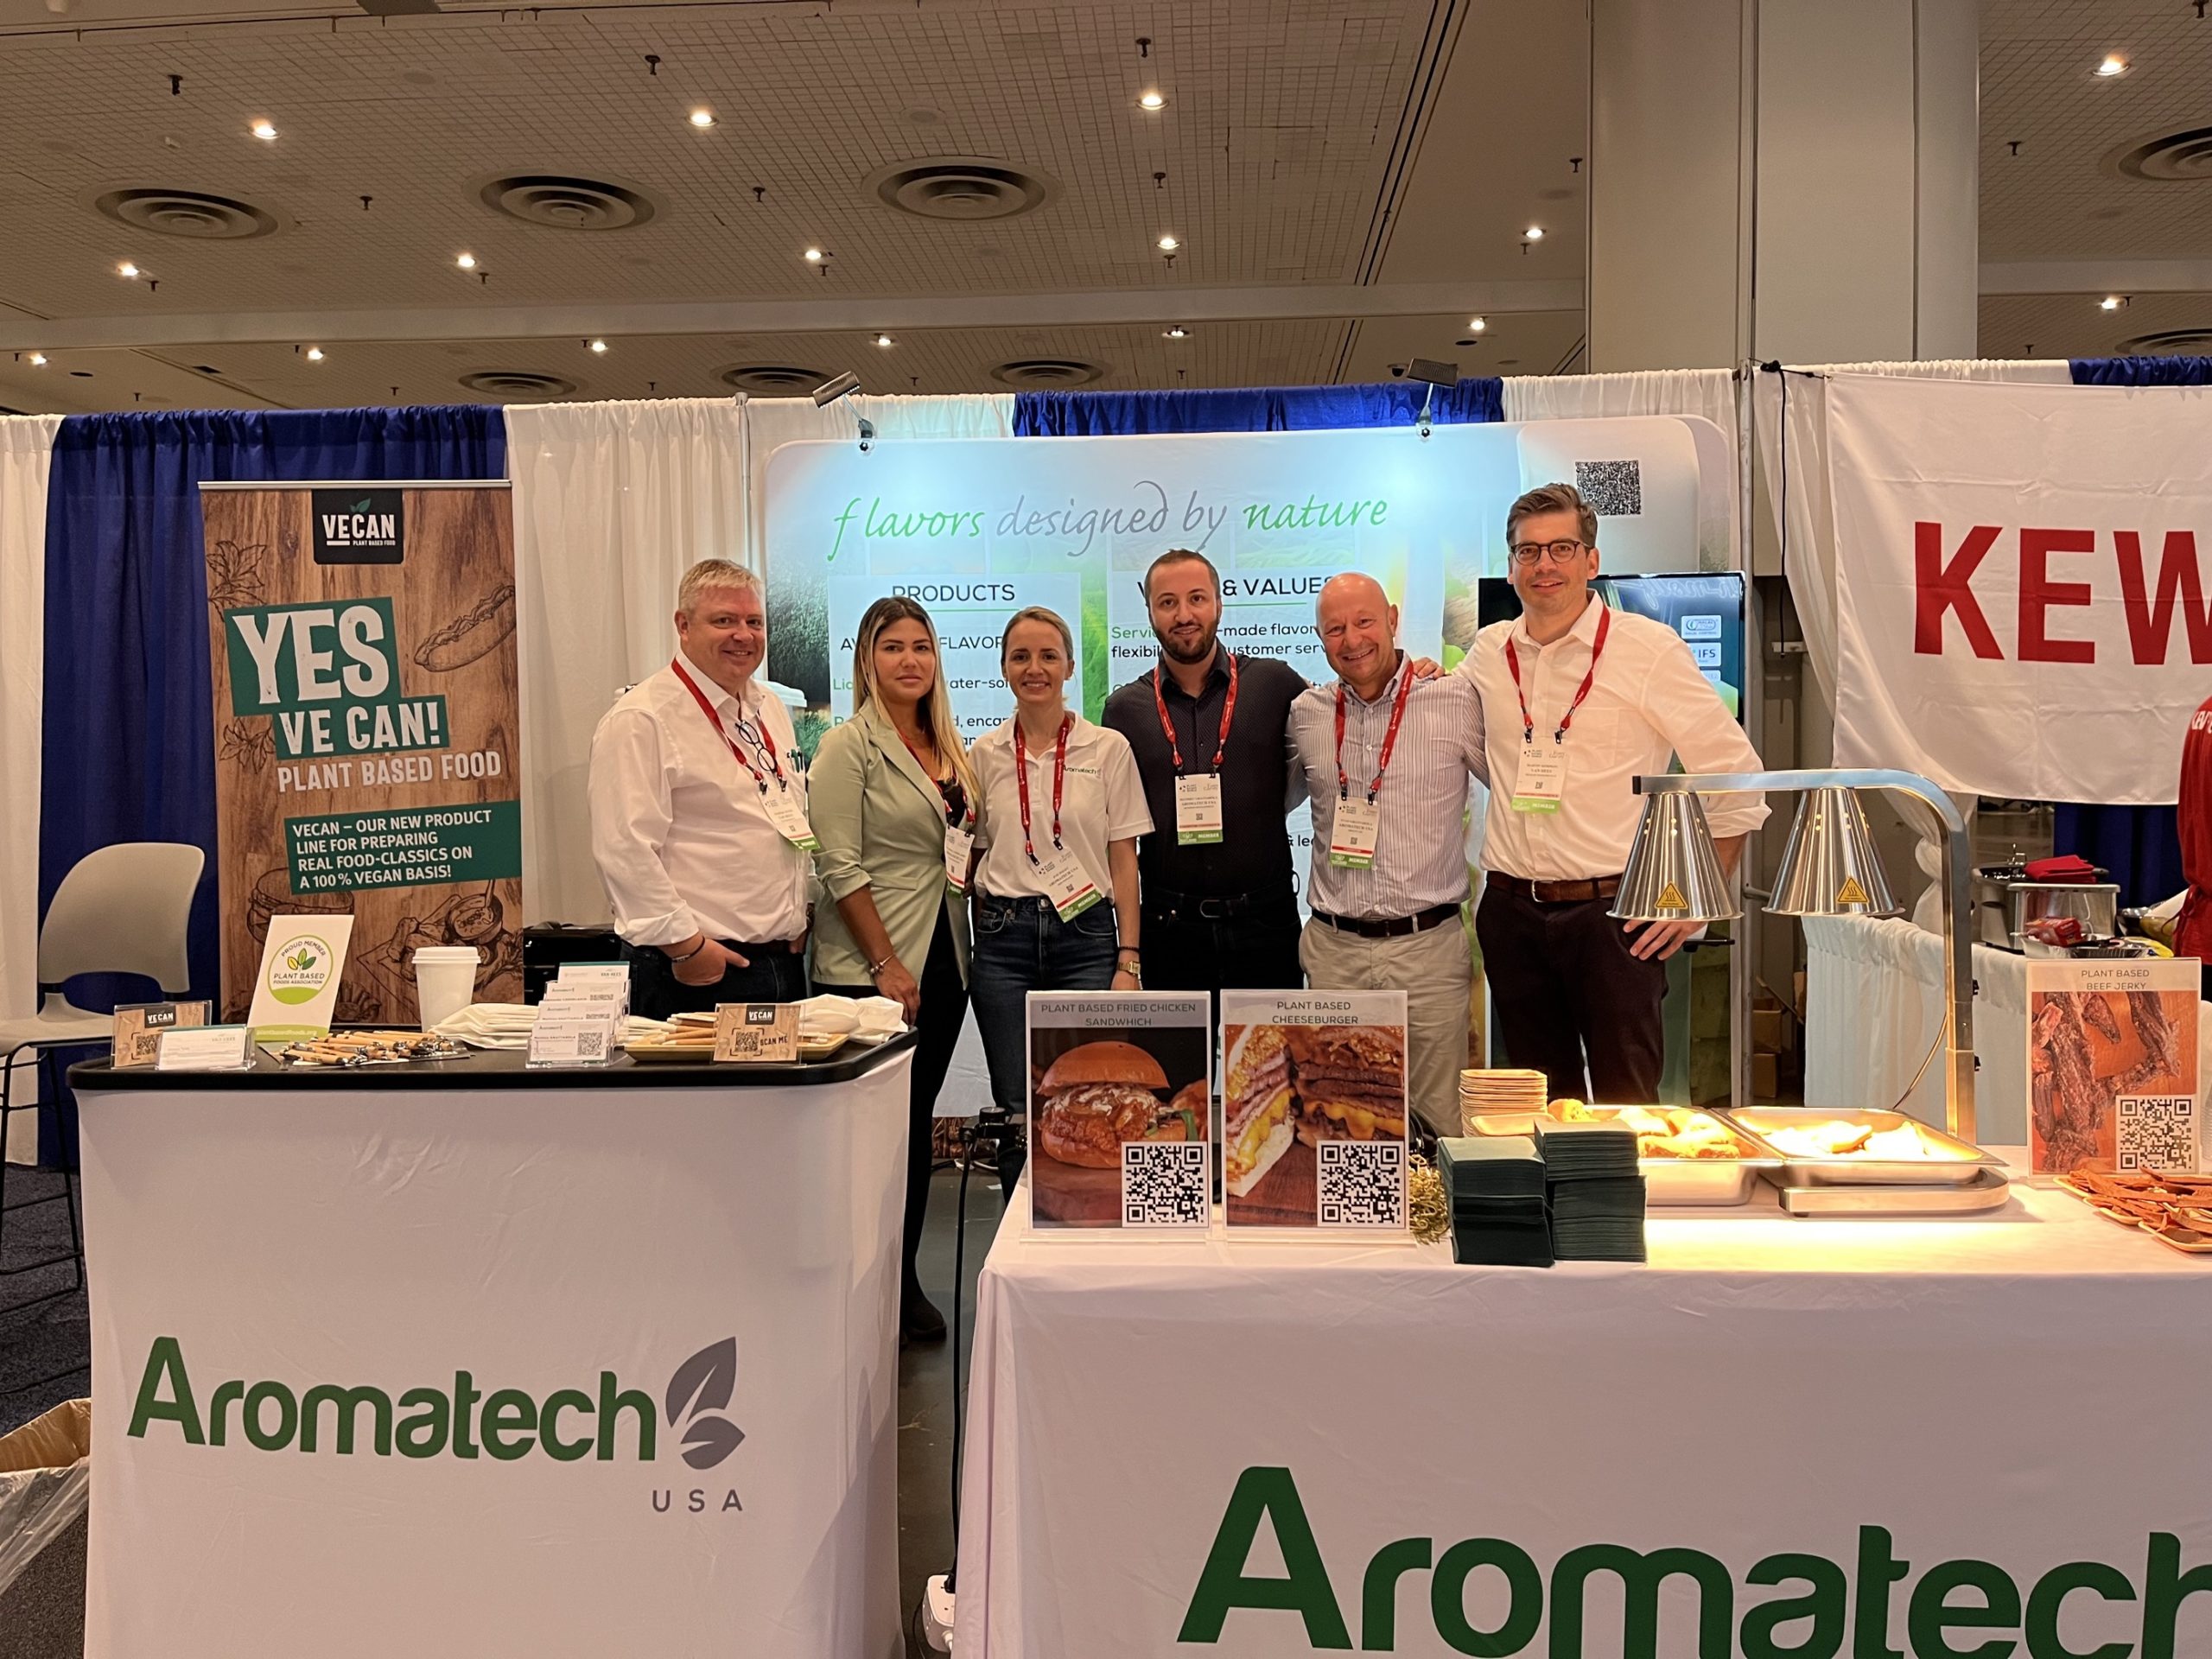 Aromatech exhibits at Plant Based World